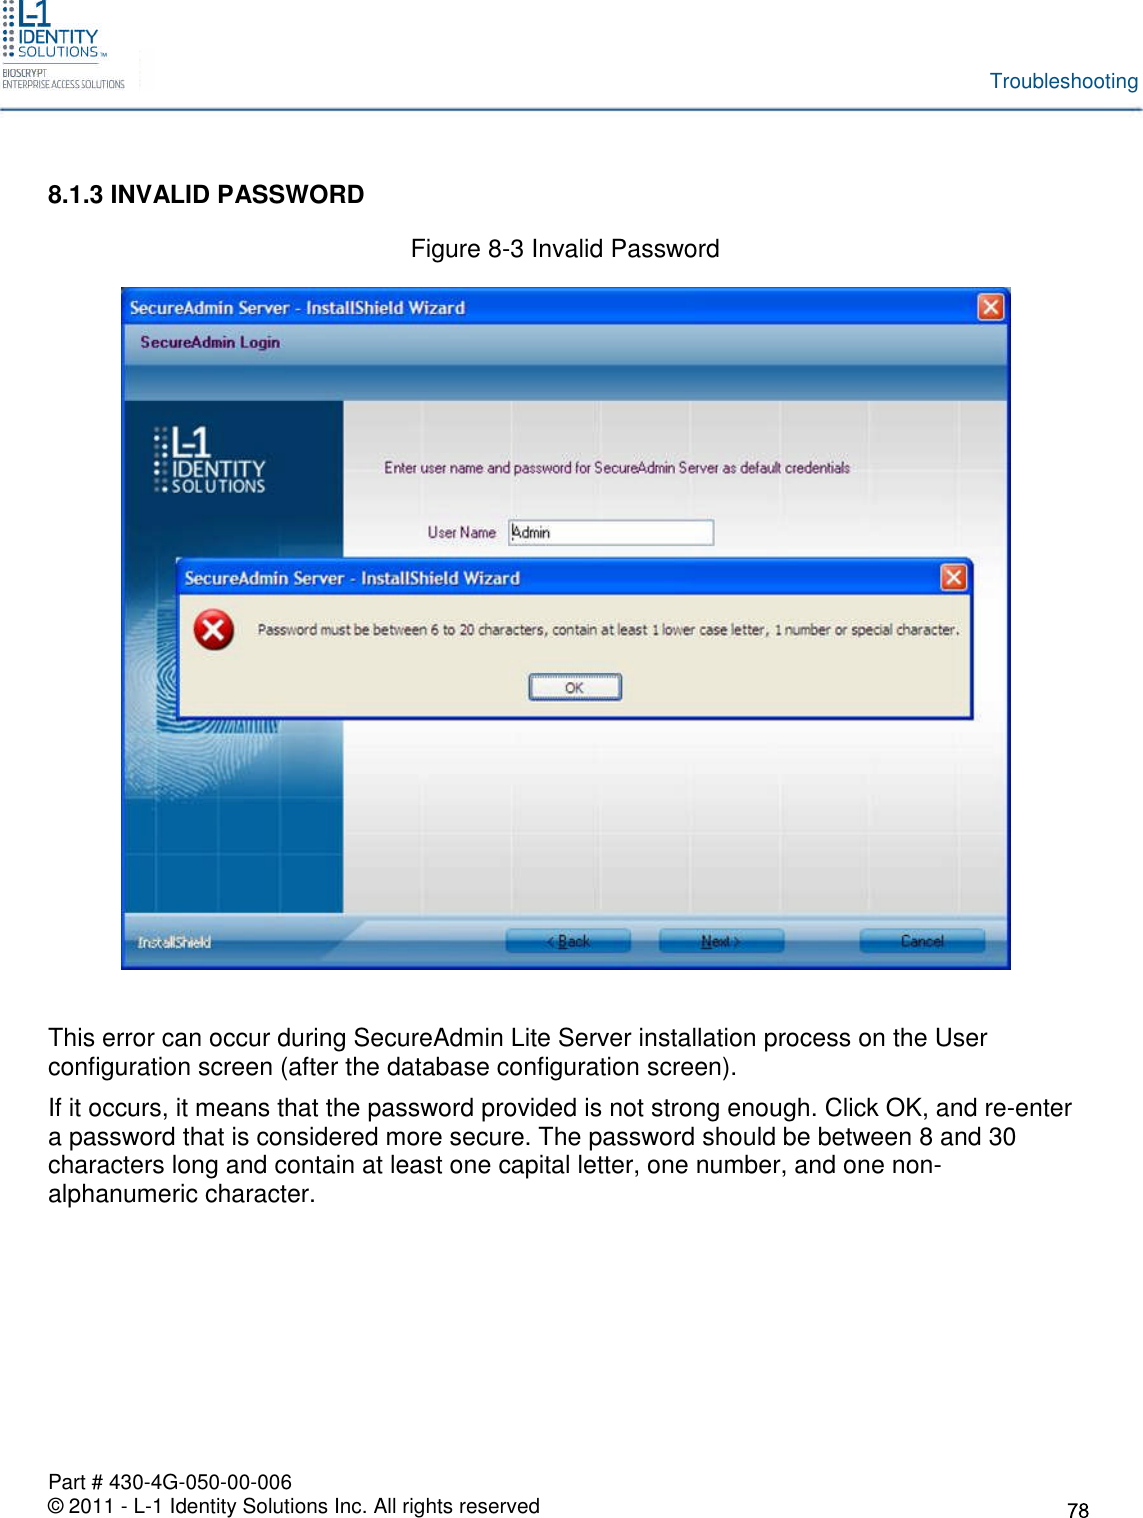 Part # 430-4G-050-00-006© 2011 - L-1 Identity Solutions Inc. All rights reservedTroubleshooting8.1.3 INVALID PASSWORDFigure 8-3 Invalid PasswordThis error can occur during SecureAdmin Lite Server installation process on the Userconfiguration screen (after the database configuration screen).If it occurs, it means that the password provided is not strong enough. Click OK, and re-entera password that is considered more secure. The password should be between 8 and 30characters long and contain at least one capital letter, one number, and one non-alphanumeric character.